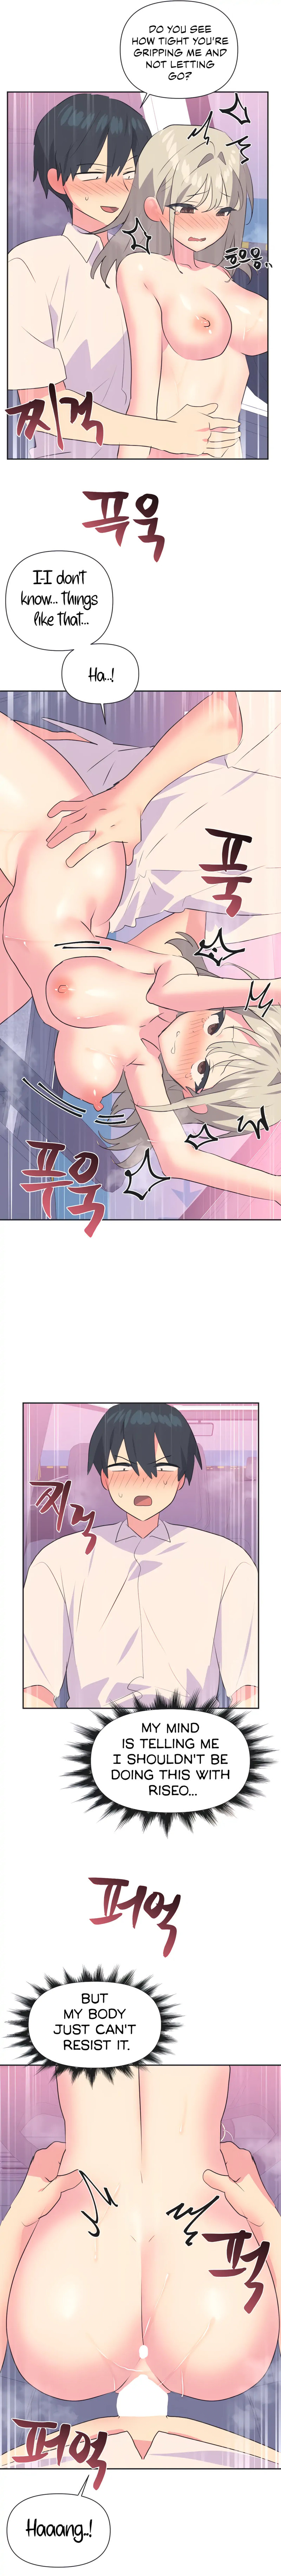 Idol’s Mating - Chapter 28 Page 5